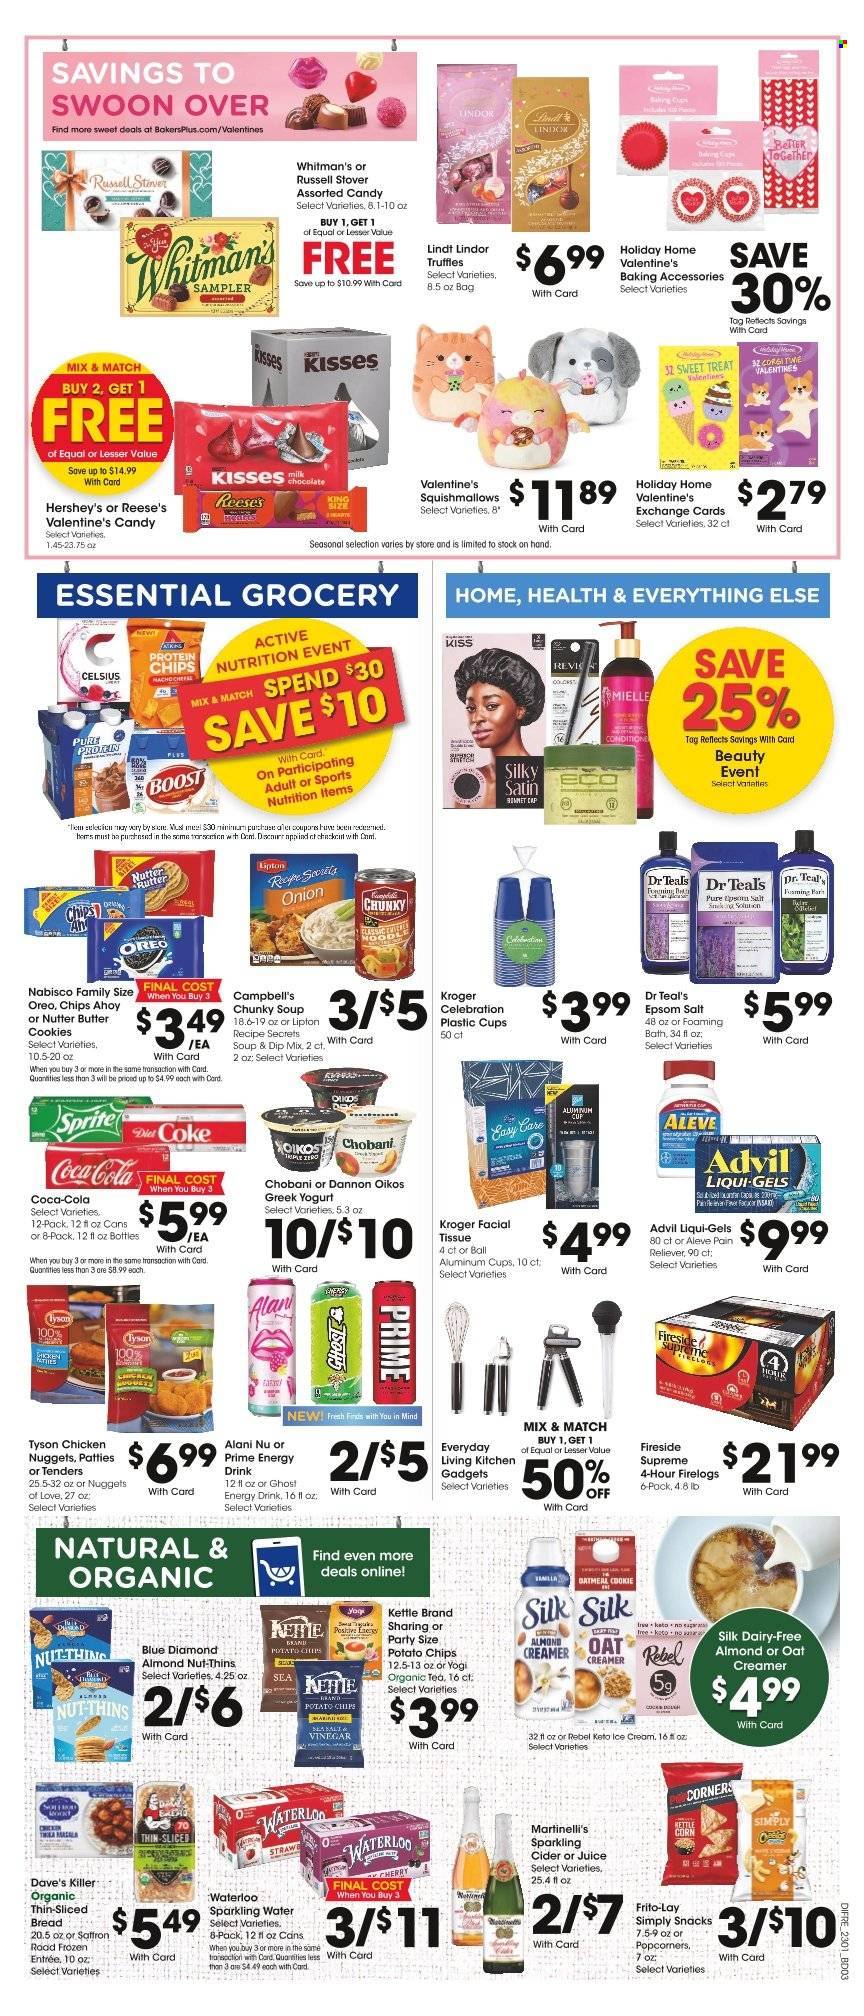 thumbnail - Baker's Flyer - 02/01/2023 - 02/07/2023 - Sales products - bread, cherries, Campbell's, soup, nuggets, chicken nuggets, noodles, Tikka Masala, cheese, greek yoghurt, Oreo, yoghurt, Oikos, Chobani, Dannon, Silk, creamer, almond creamer, ice cream, Reese's, Hershey's, Enlightened lce Cream, cookies, butter cookies, snack, Lindt, Lindor, truffles, Celebration, potato chips, Thins, popcorn, Frito-Lay, Blue Diamond, Coca-Cola, Sprite, juice, energy drink, Lipton, Diet Coke, sparkling water, Boost, tea, sparkling cider, sparkling wine, cider, tissues, Mielle, baking accessories, cup, Squishmallows, Aleve, Advil Rapid. Page 5.